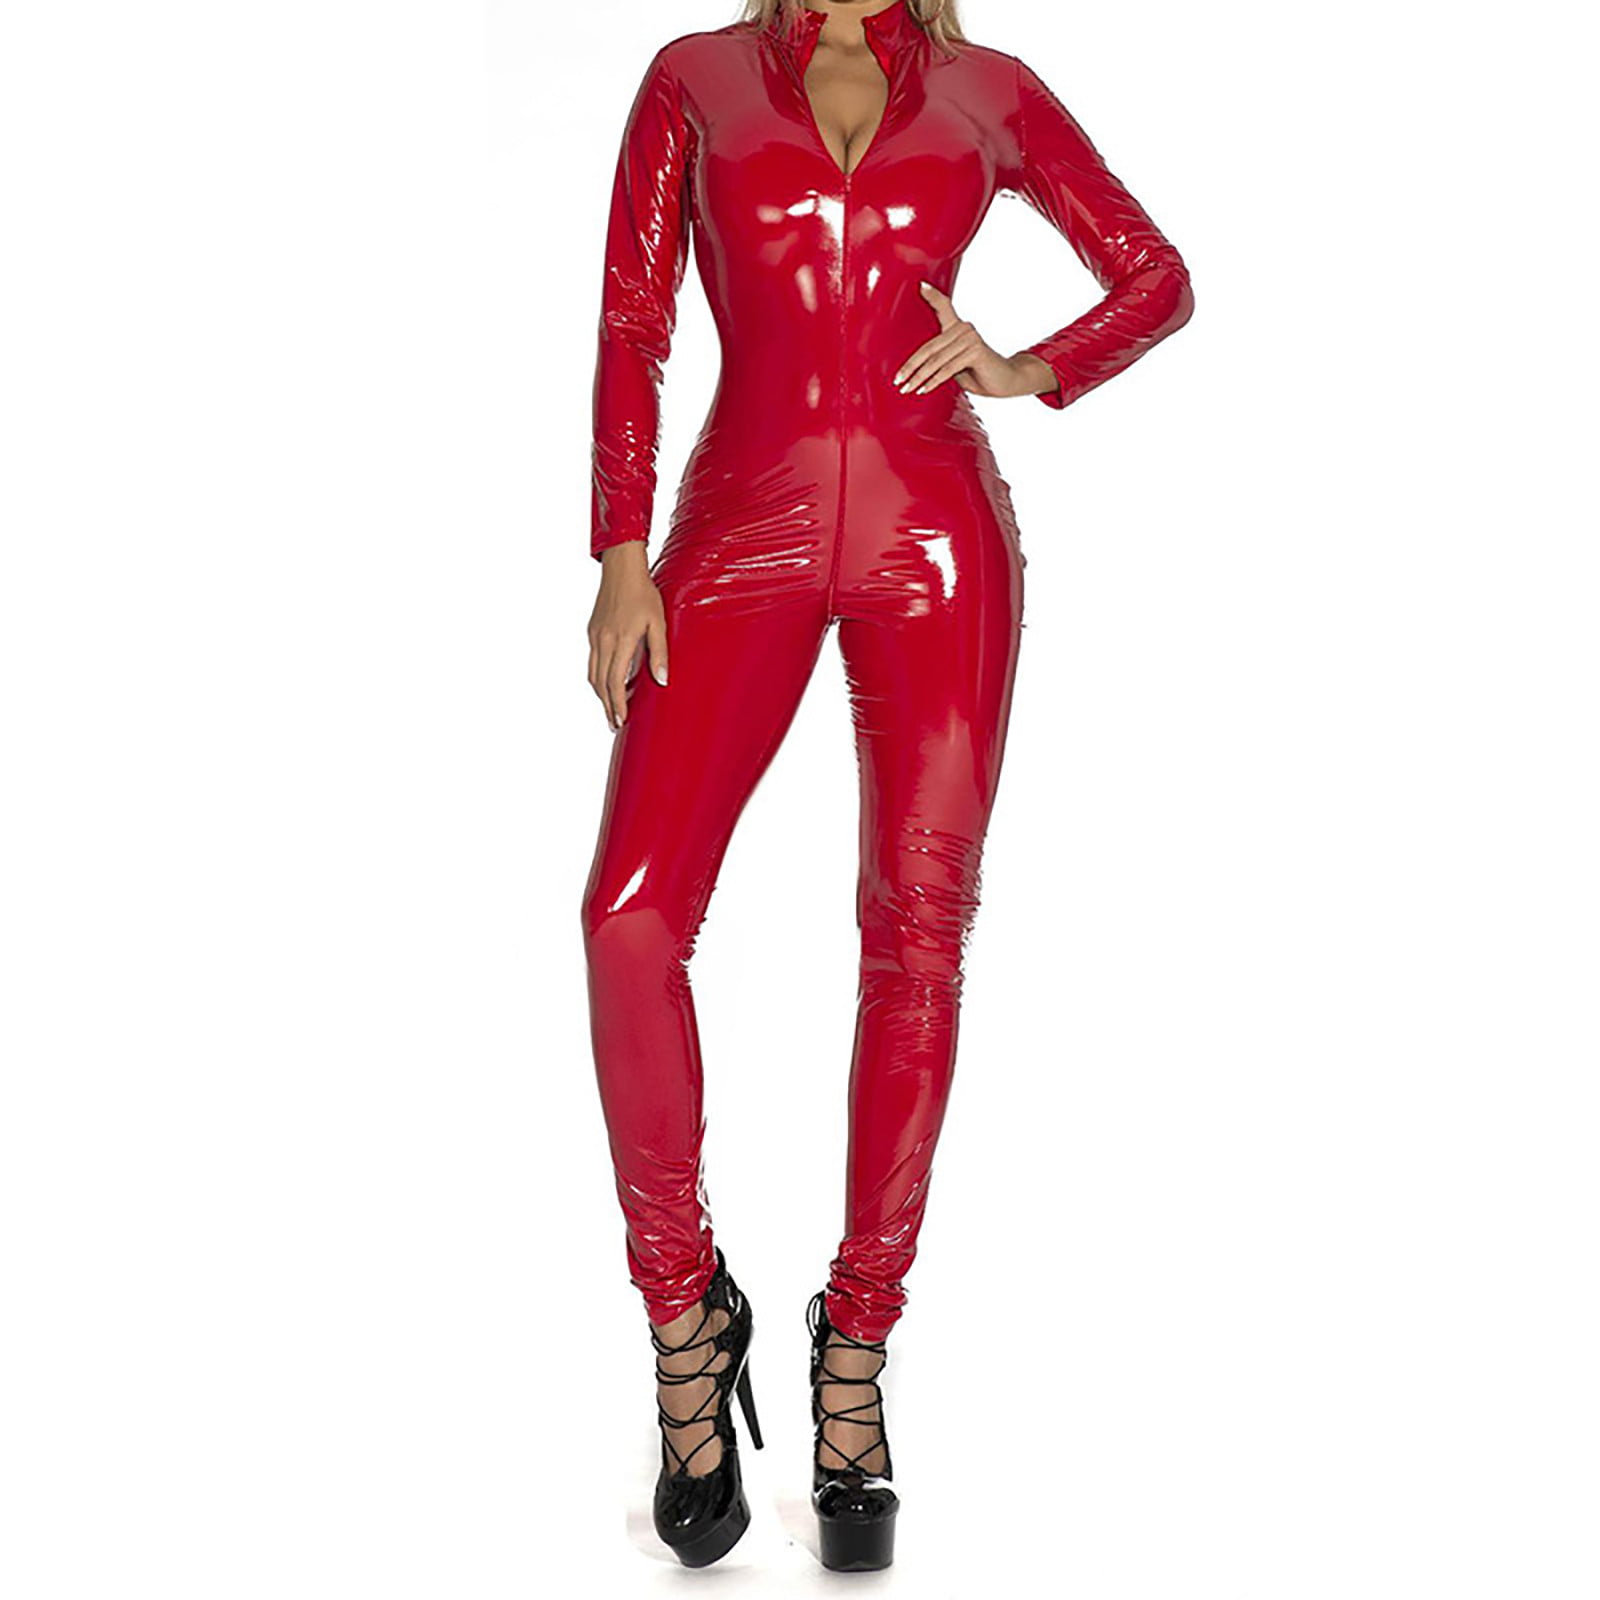 WGOUP Women's Leather Bodysuit Latex Overall Catsuit Sexy Jumpsuit